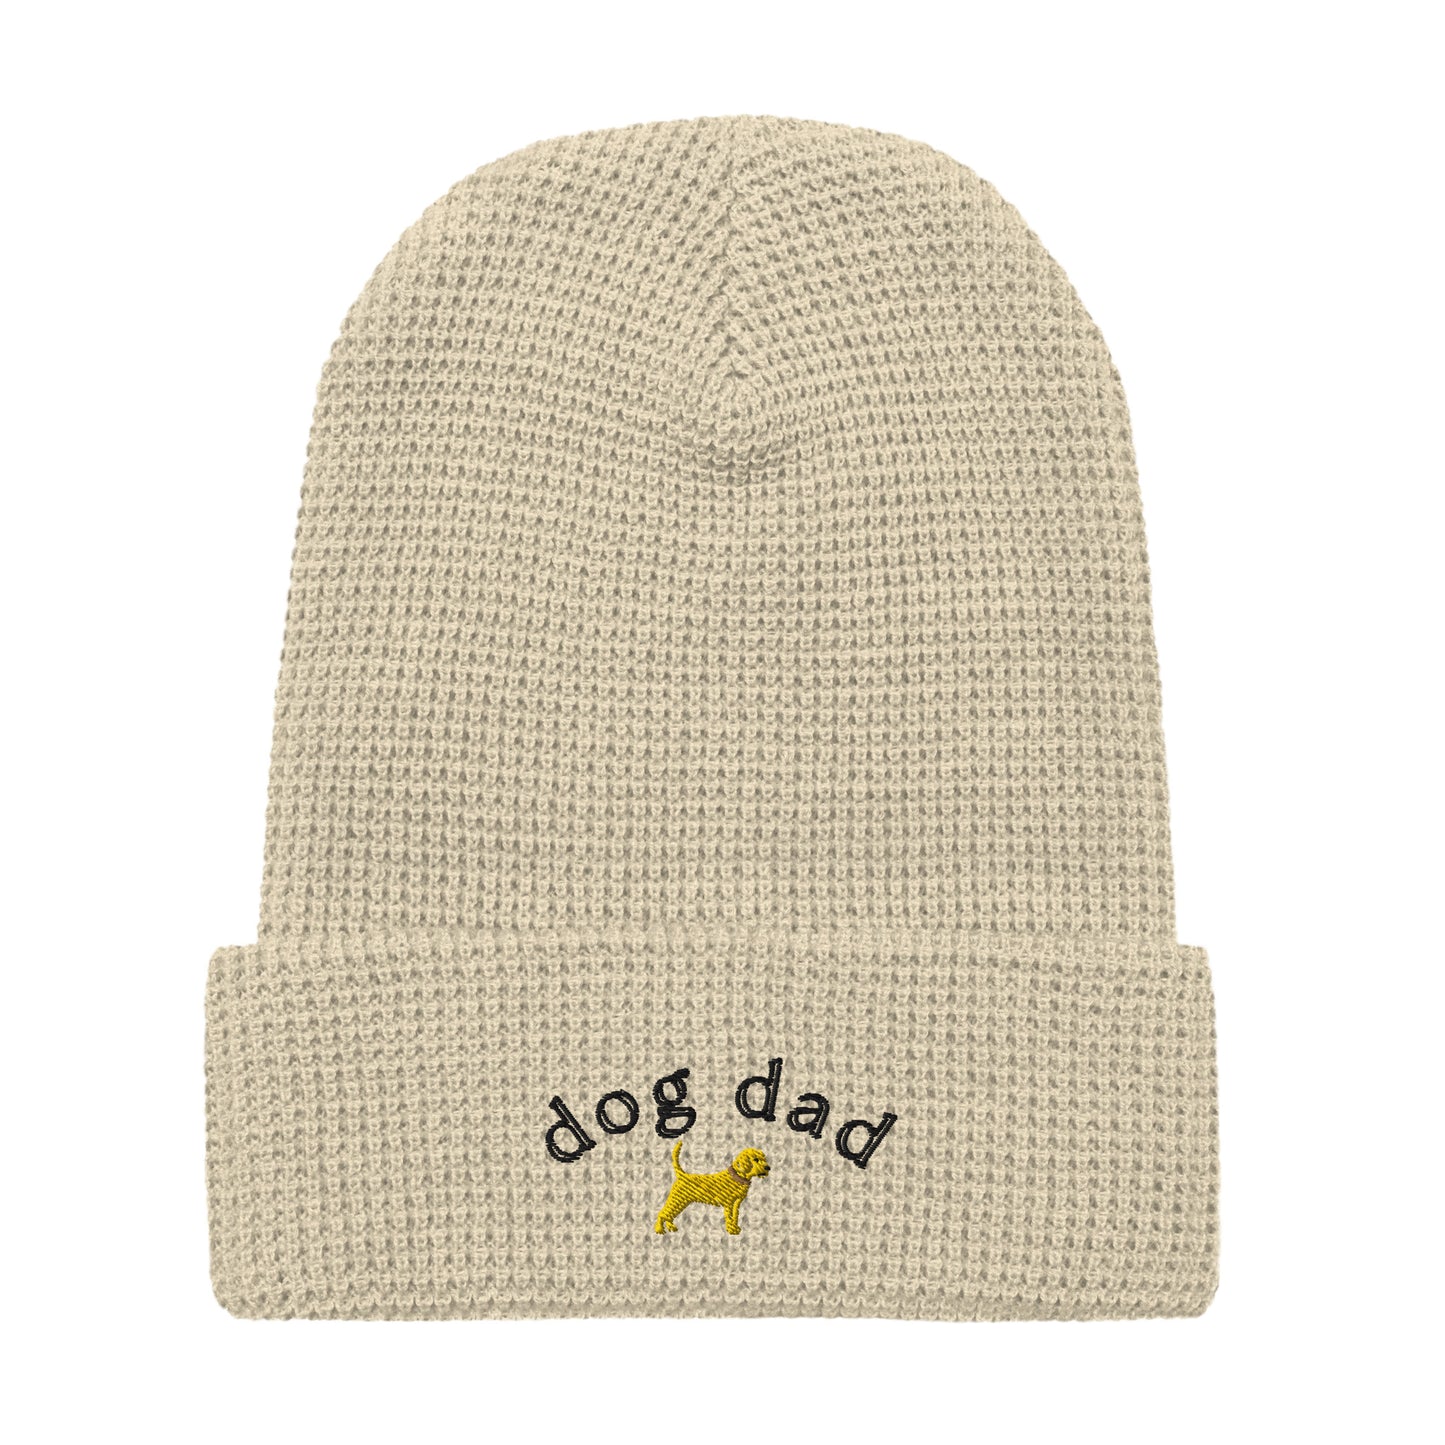 Unleashed Life Dog Dad Embroidered Beanie